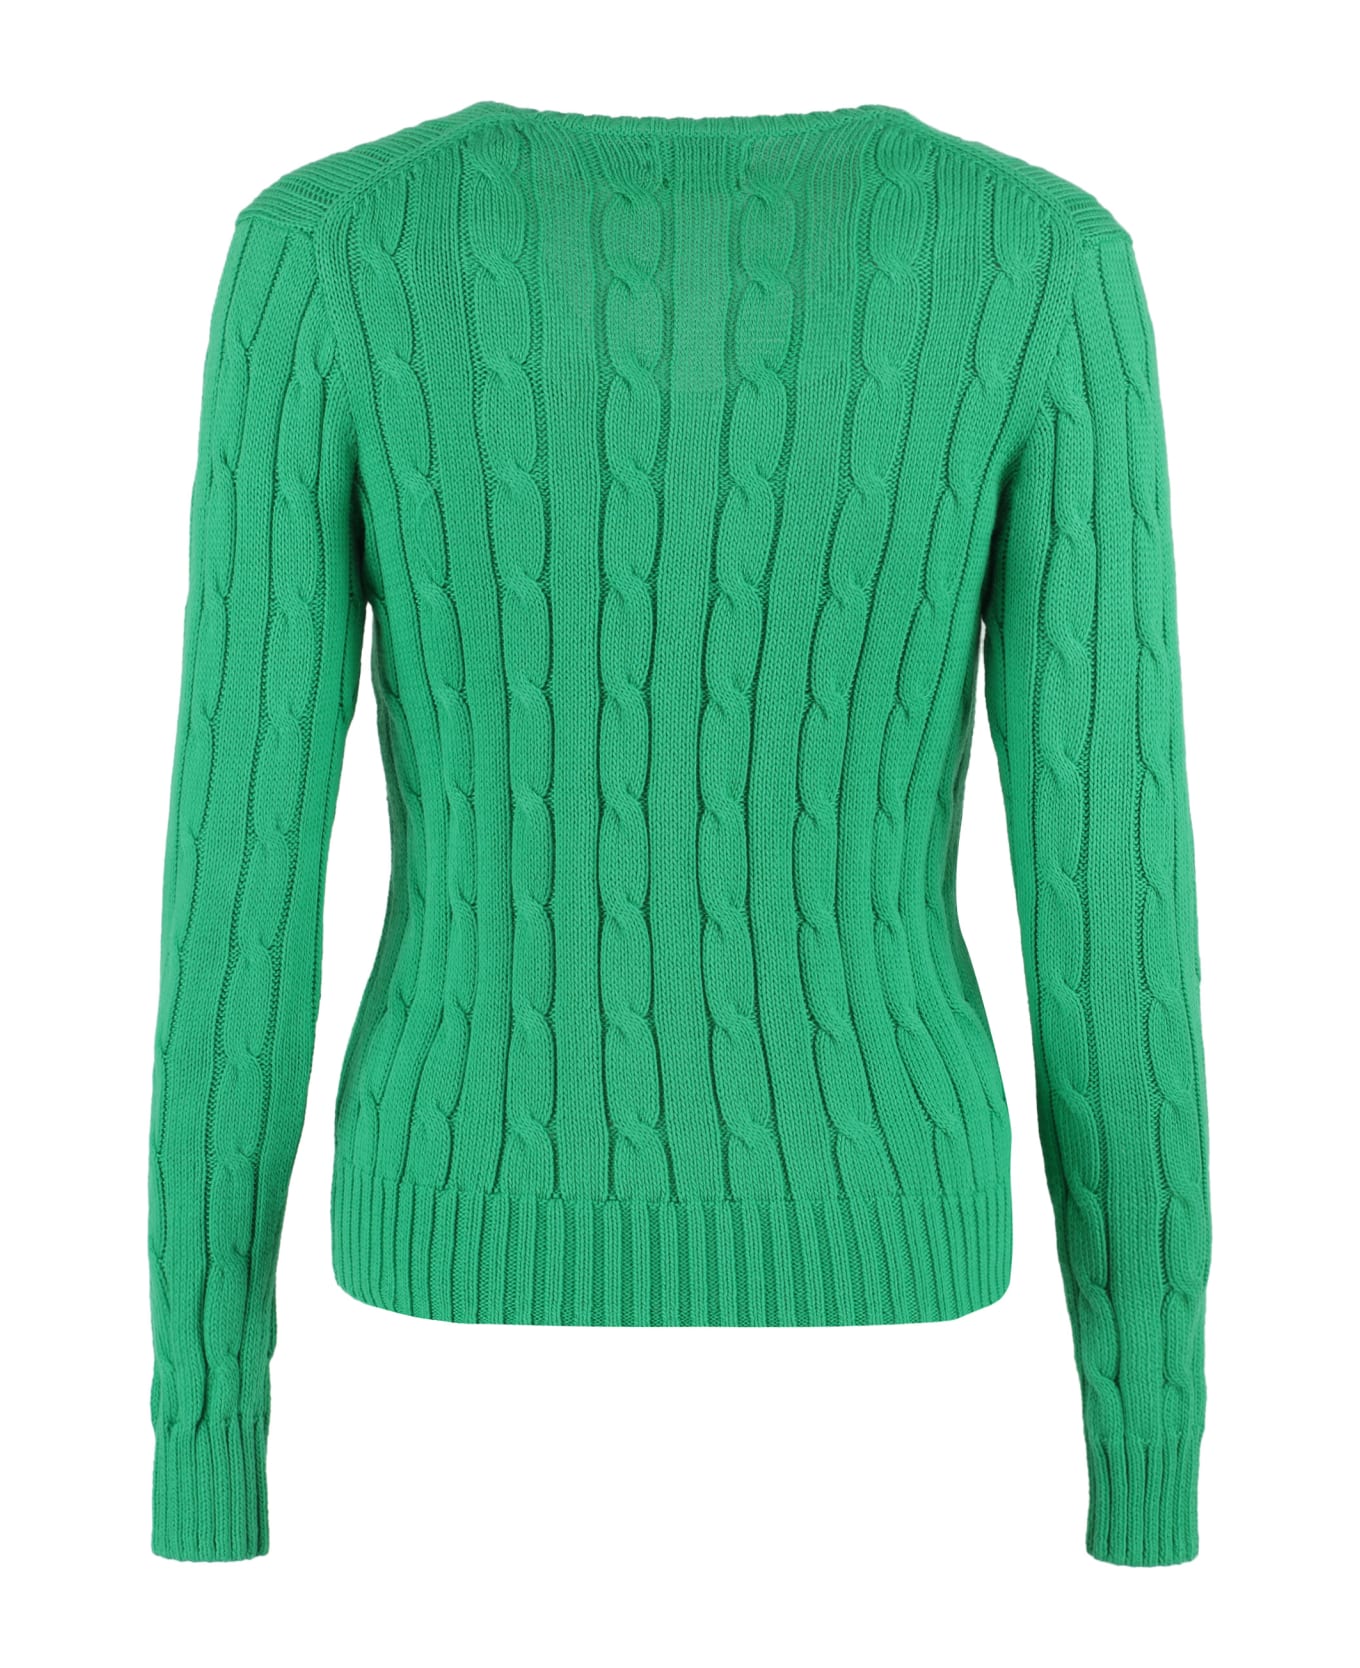 Polo Ralph Lauren Cable Knit Sweater - green